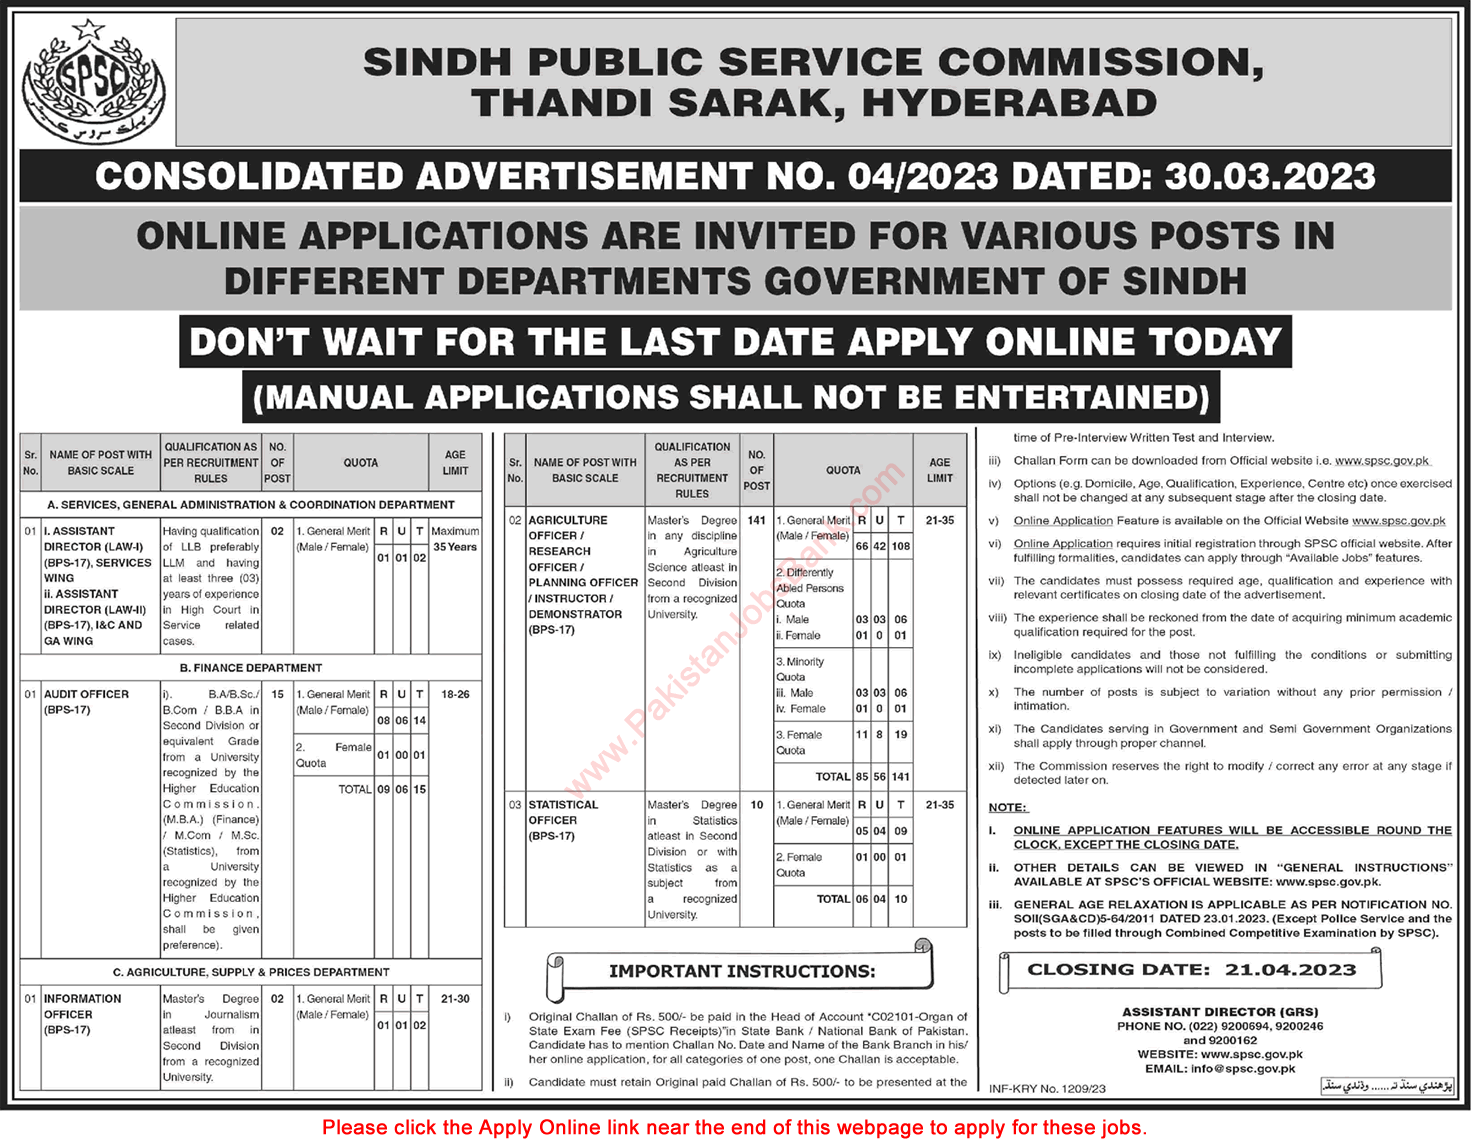 SPSC Jobs March 2023 April Apply Online Consolidated Advertisement No 04/2023 4/2023 Latest